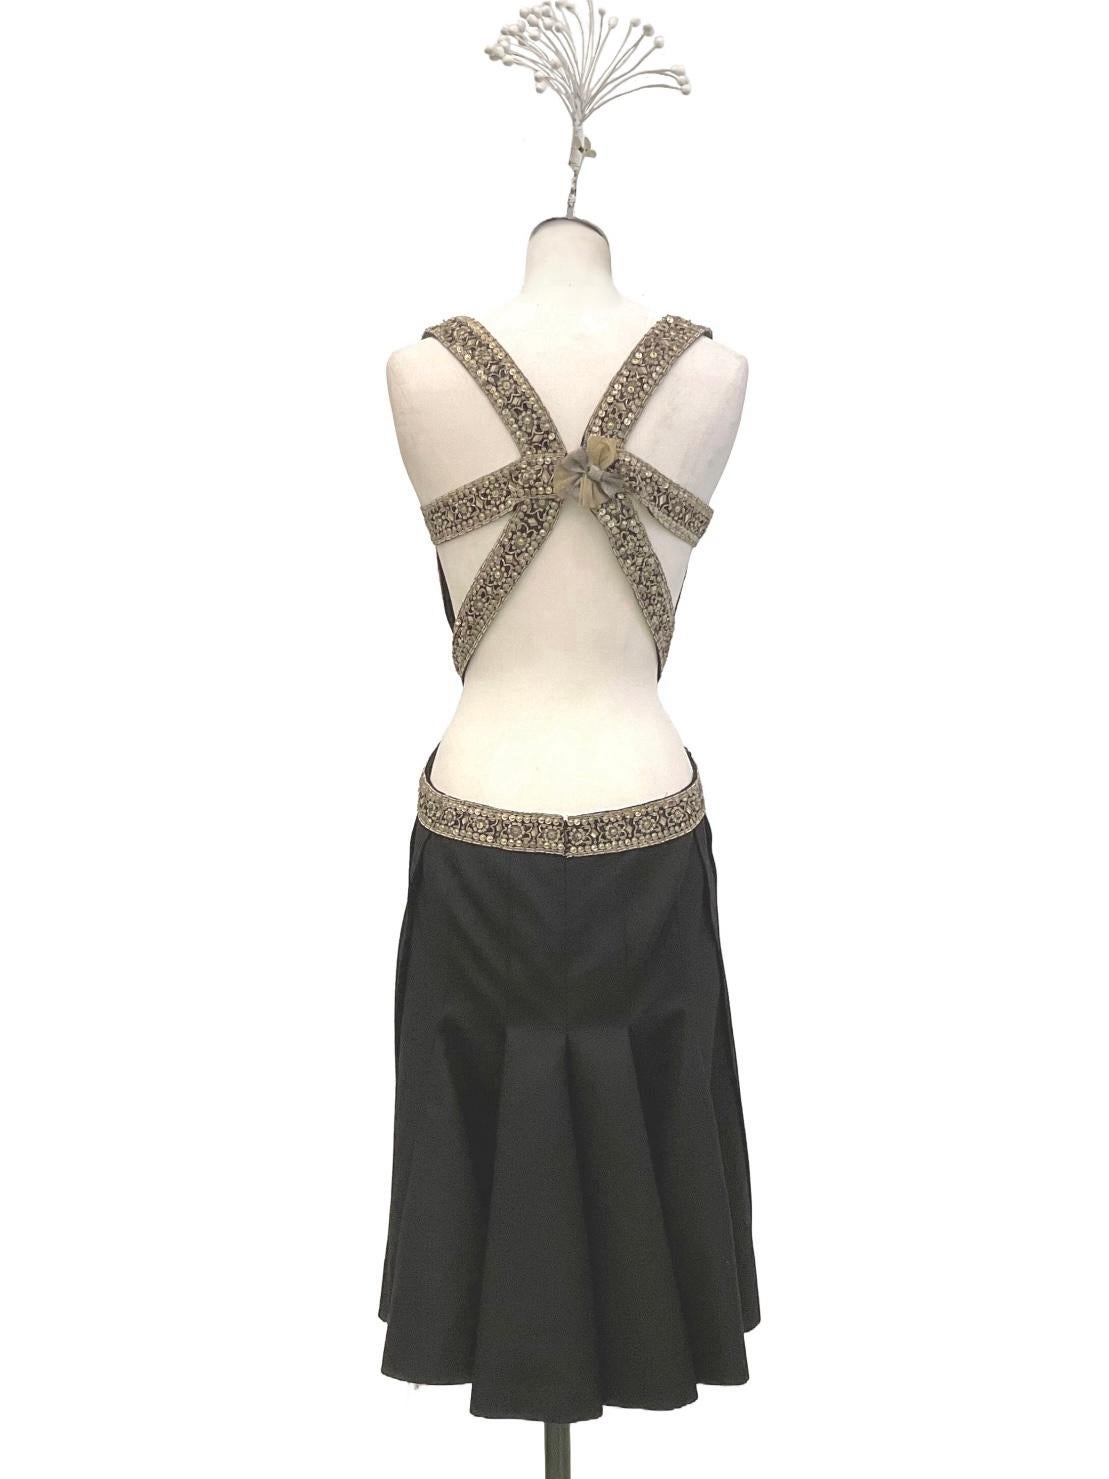 Black dress by Alexander McQueen from the Ready to Wear collection
Fall Winter 2003.
The petticoat neckline and straps, which continue with a crossover
on the back, are embellished with an appliquéd embroidered ribbon.
The embroidery of sequins,